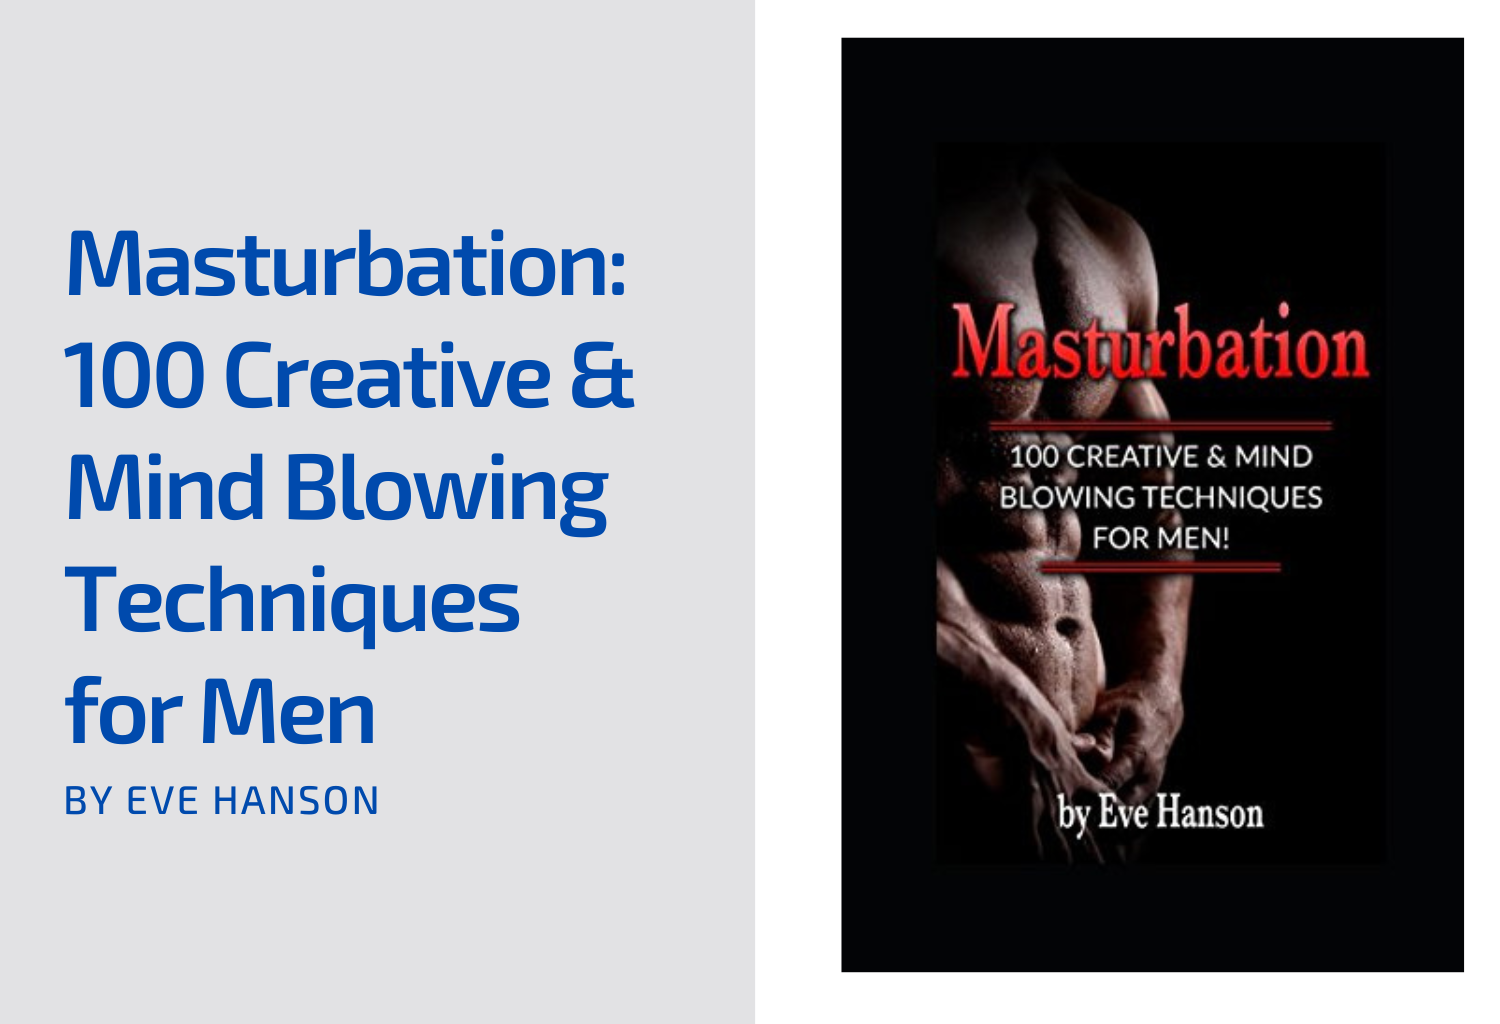 Masturbation: 100 Creative and Mind Blowing Techniques for Men by Eve Hanson